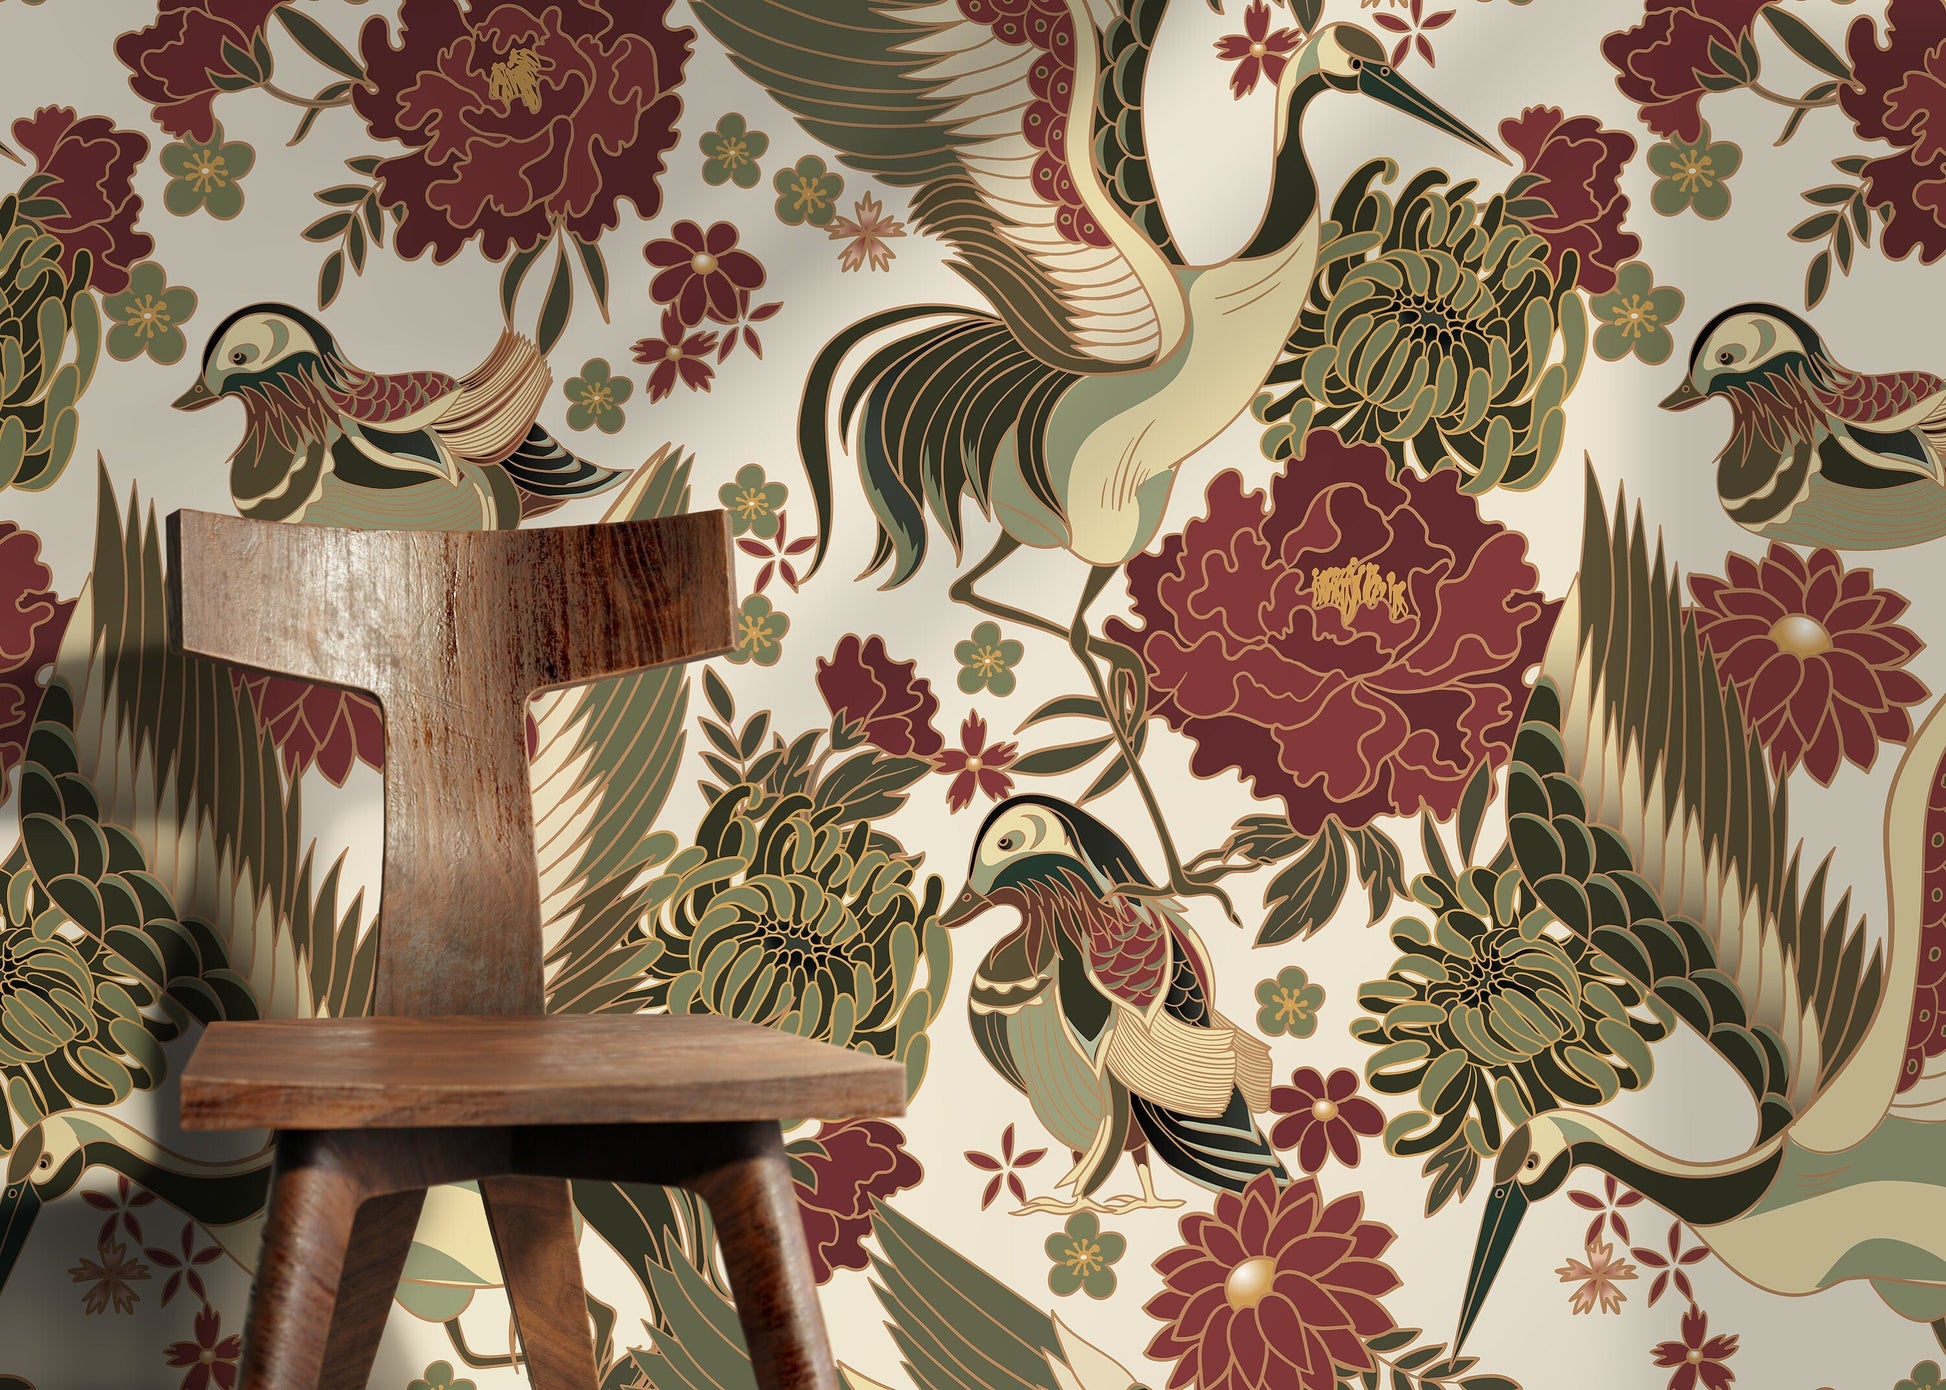 Chinoiserie Crane Birds and Floral Wallpaper / Peel and Stick Wallpaper Removable Wallpaper Home Decor Wall Art Wall Decor Room Decor - D247